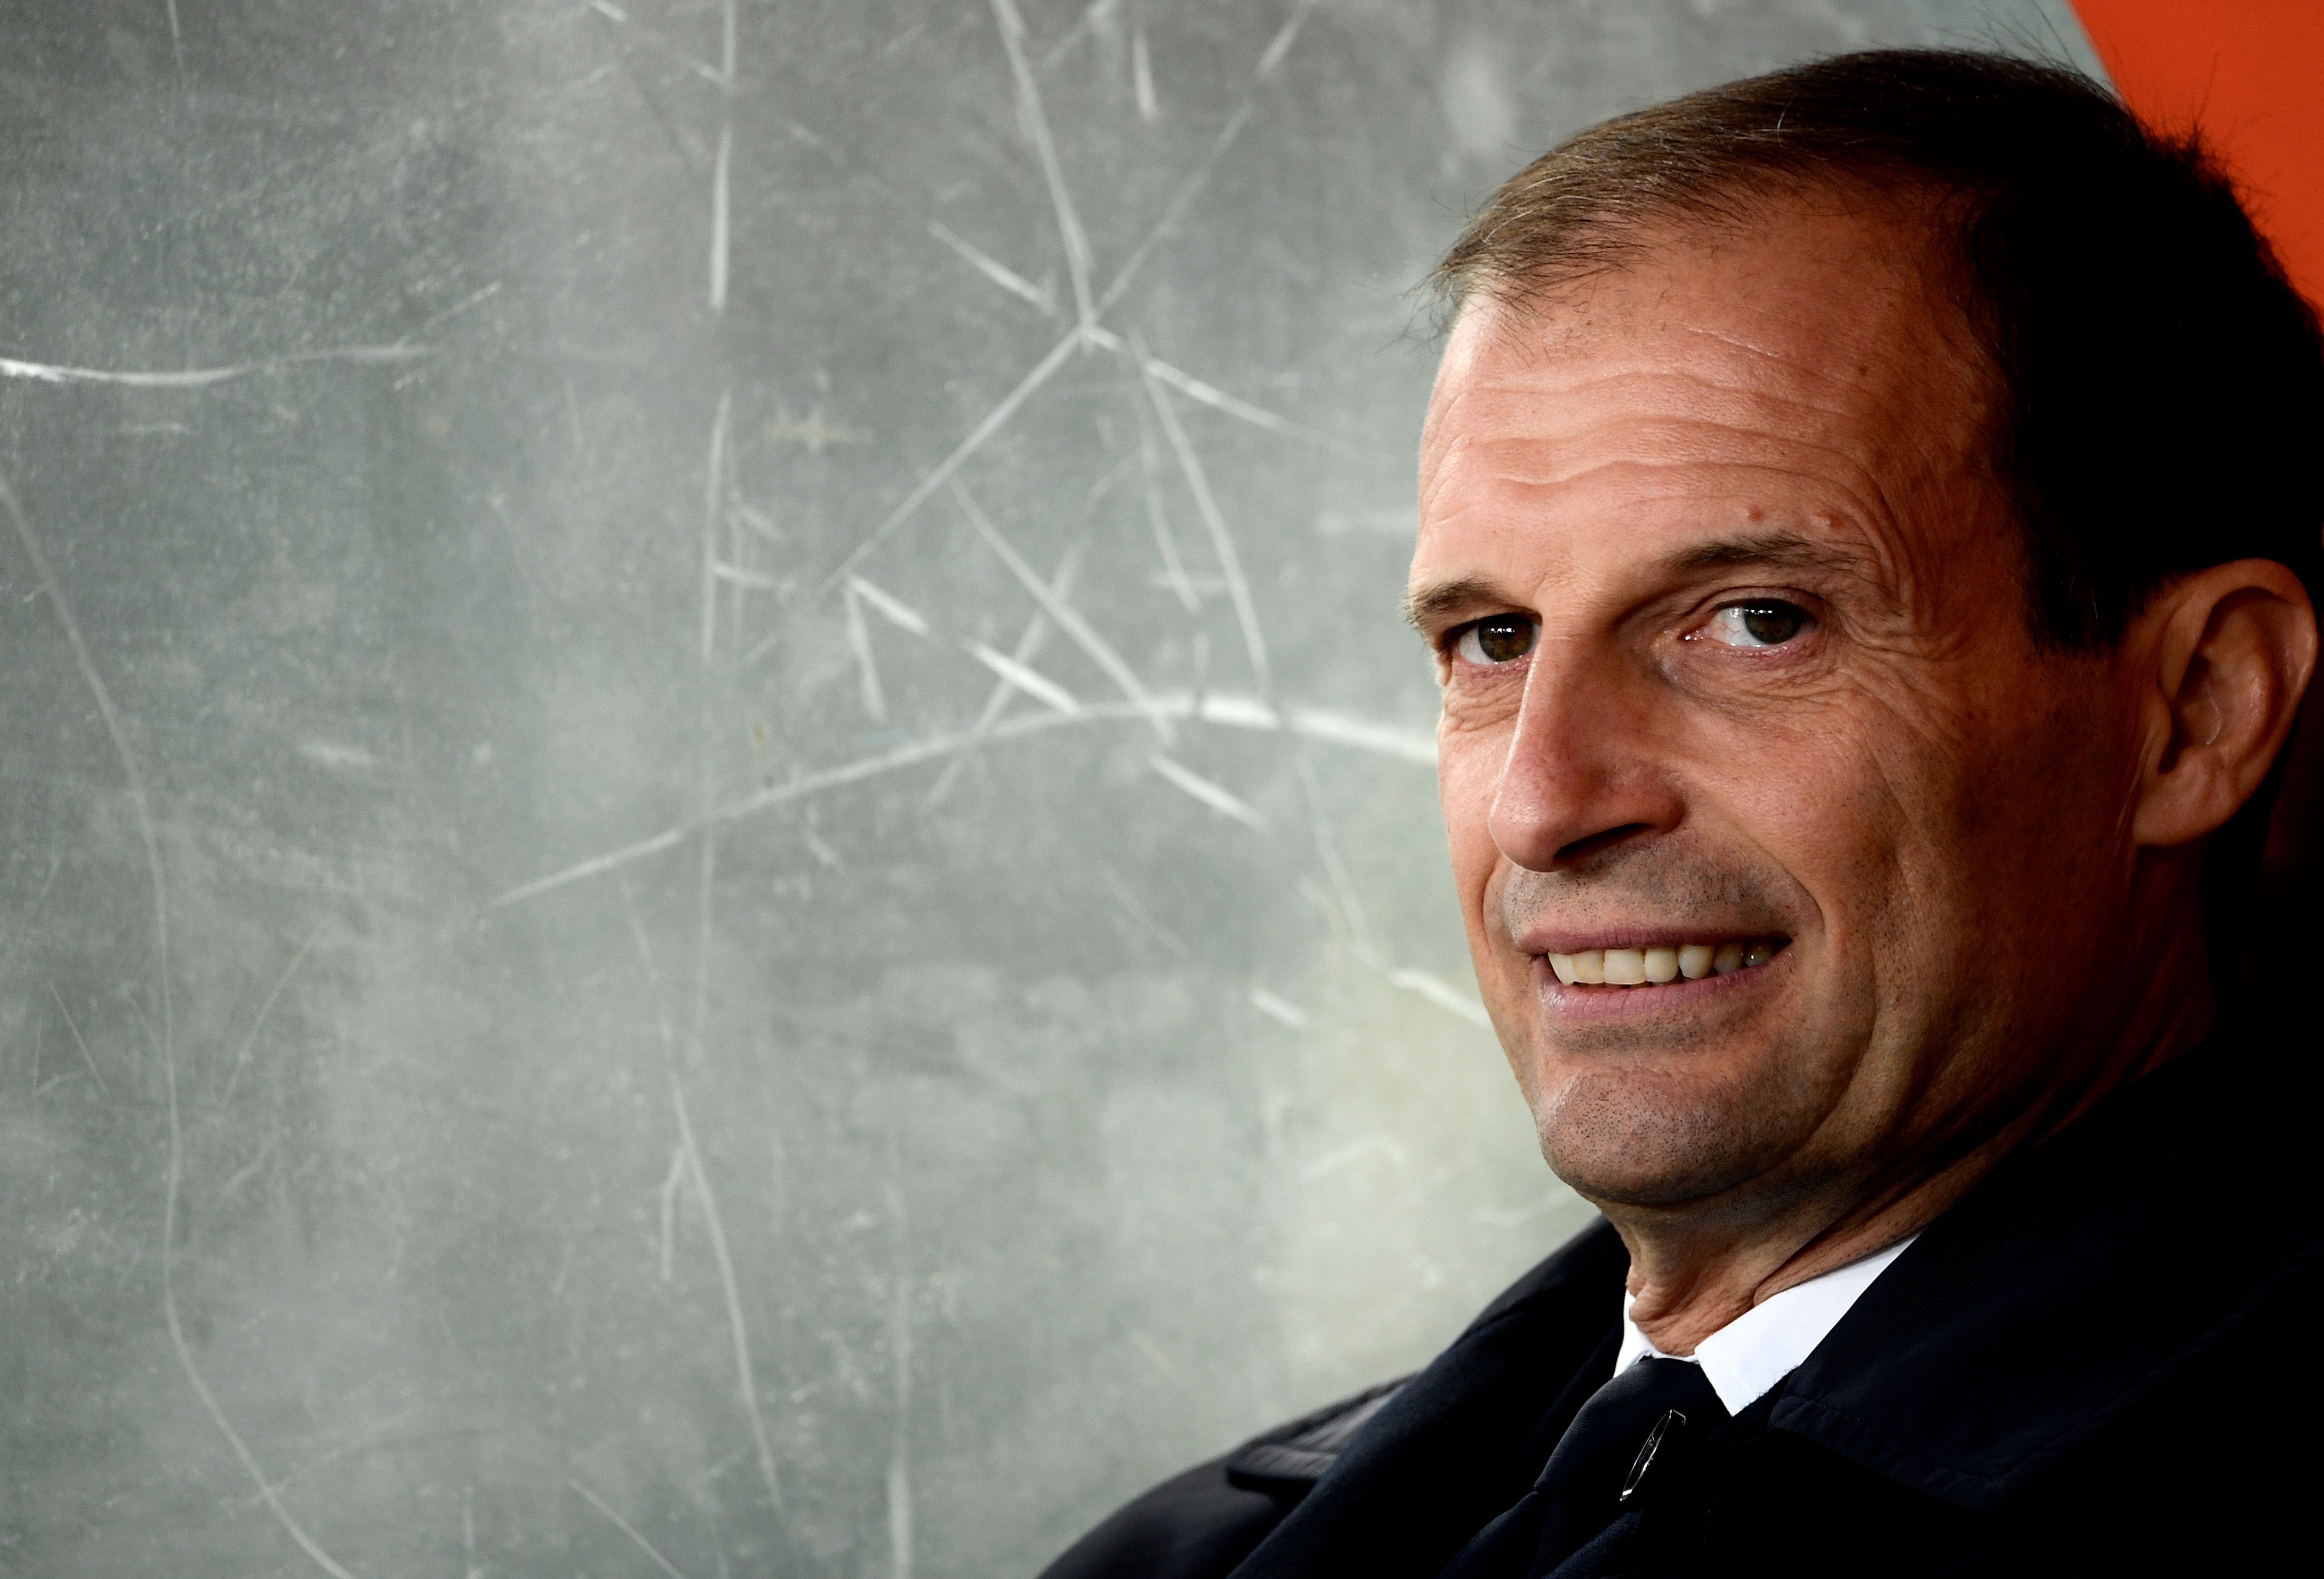 Signing Max Allegri would be a coup for Arsenal (Photo by Filippo MONTEFORTE / AFP) (Photo credit should read FILIPPO MONTEFORTE/AFP/Getty Images)